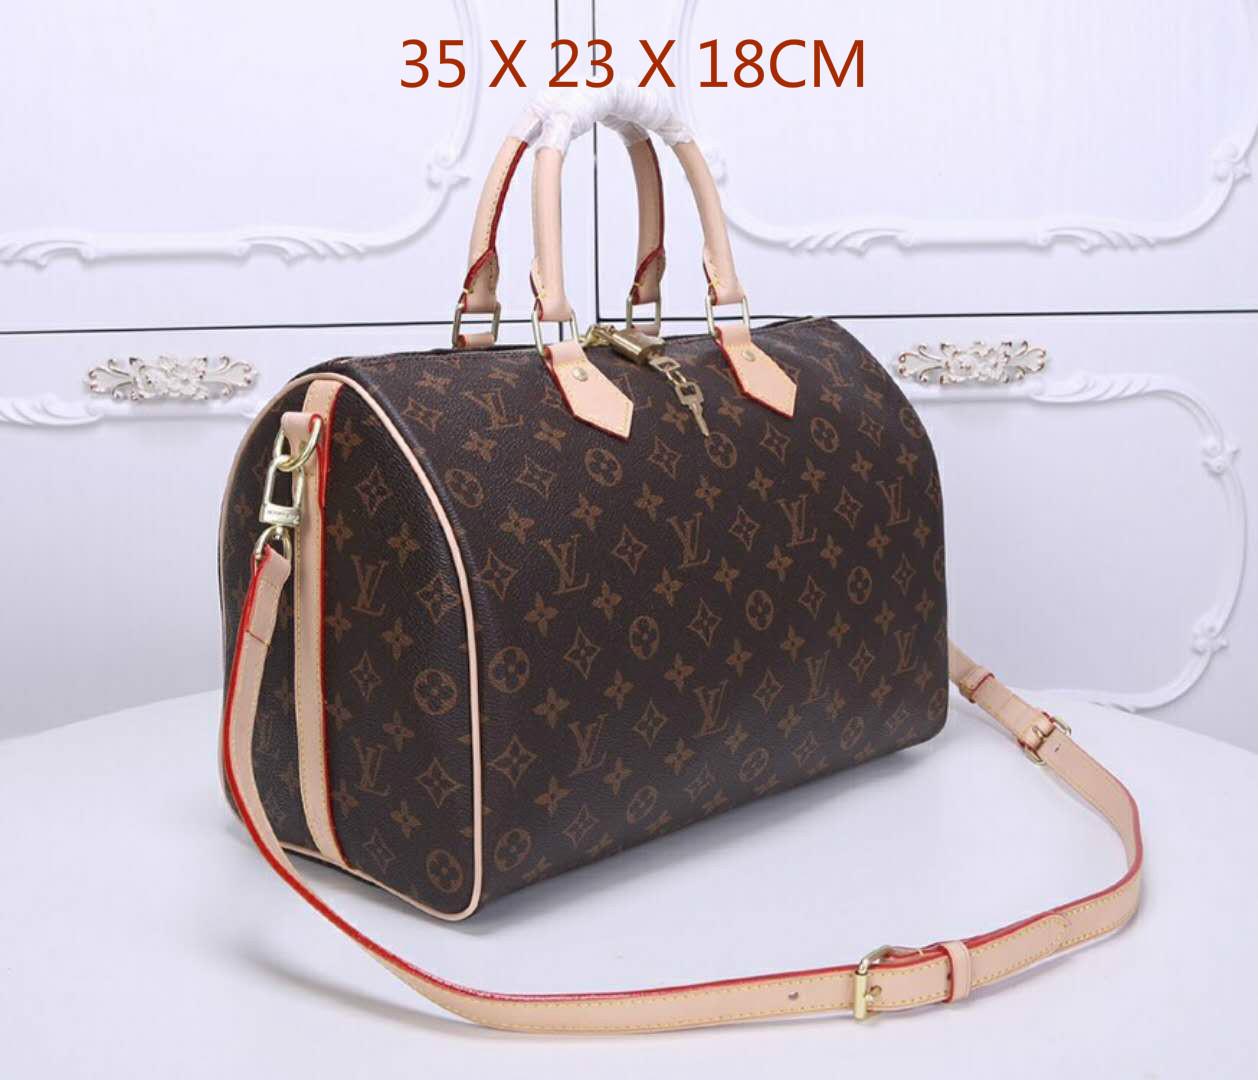 High-quality bag Unique shape Leather handle Monogram canvas with diagonal back strap Today it has become a perfect urban handbag